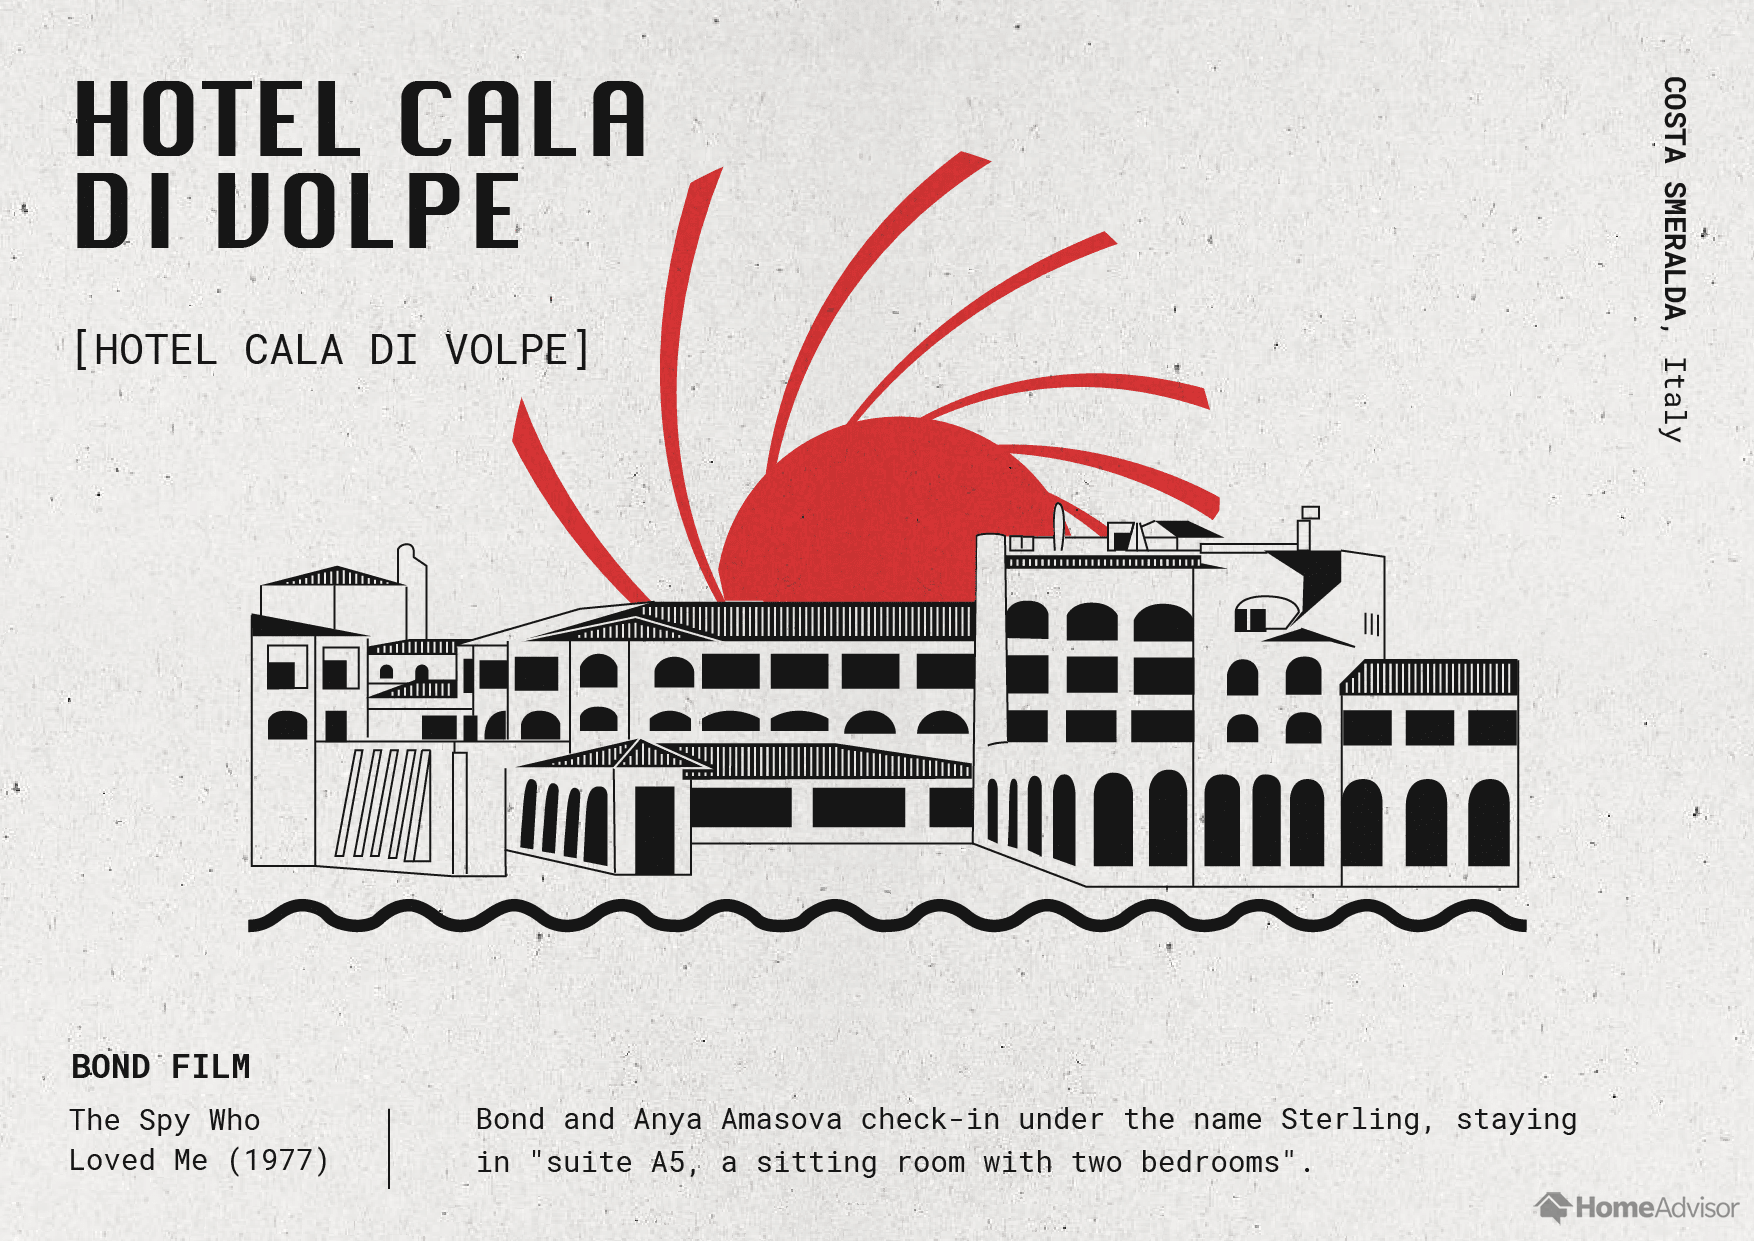 14_The-Architecture-of-James-Bond_Hotel-Cala-Di-Volpe.png